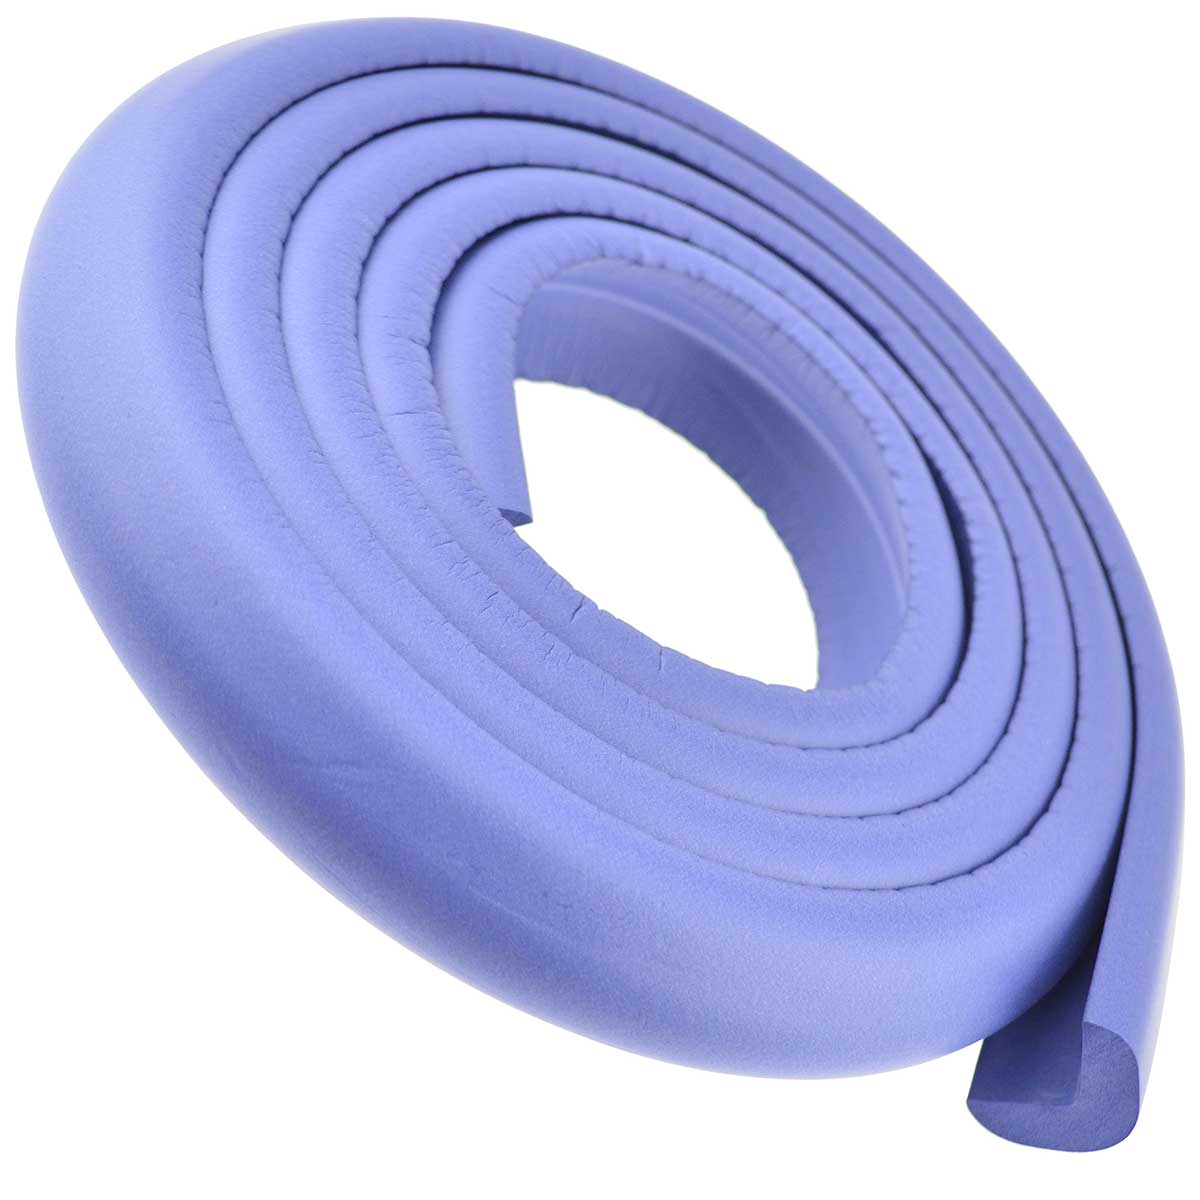 1 Roll Purple Standard L-Shaped Foam Edge Protector 78.7 inches (2 meters)